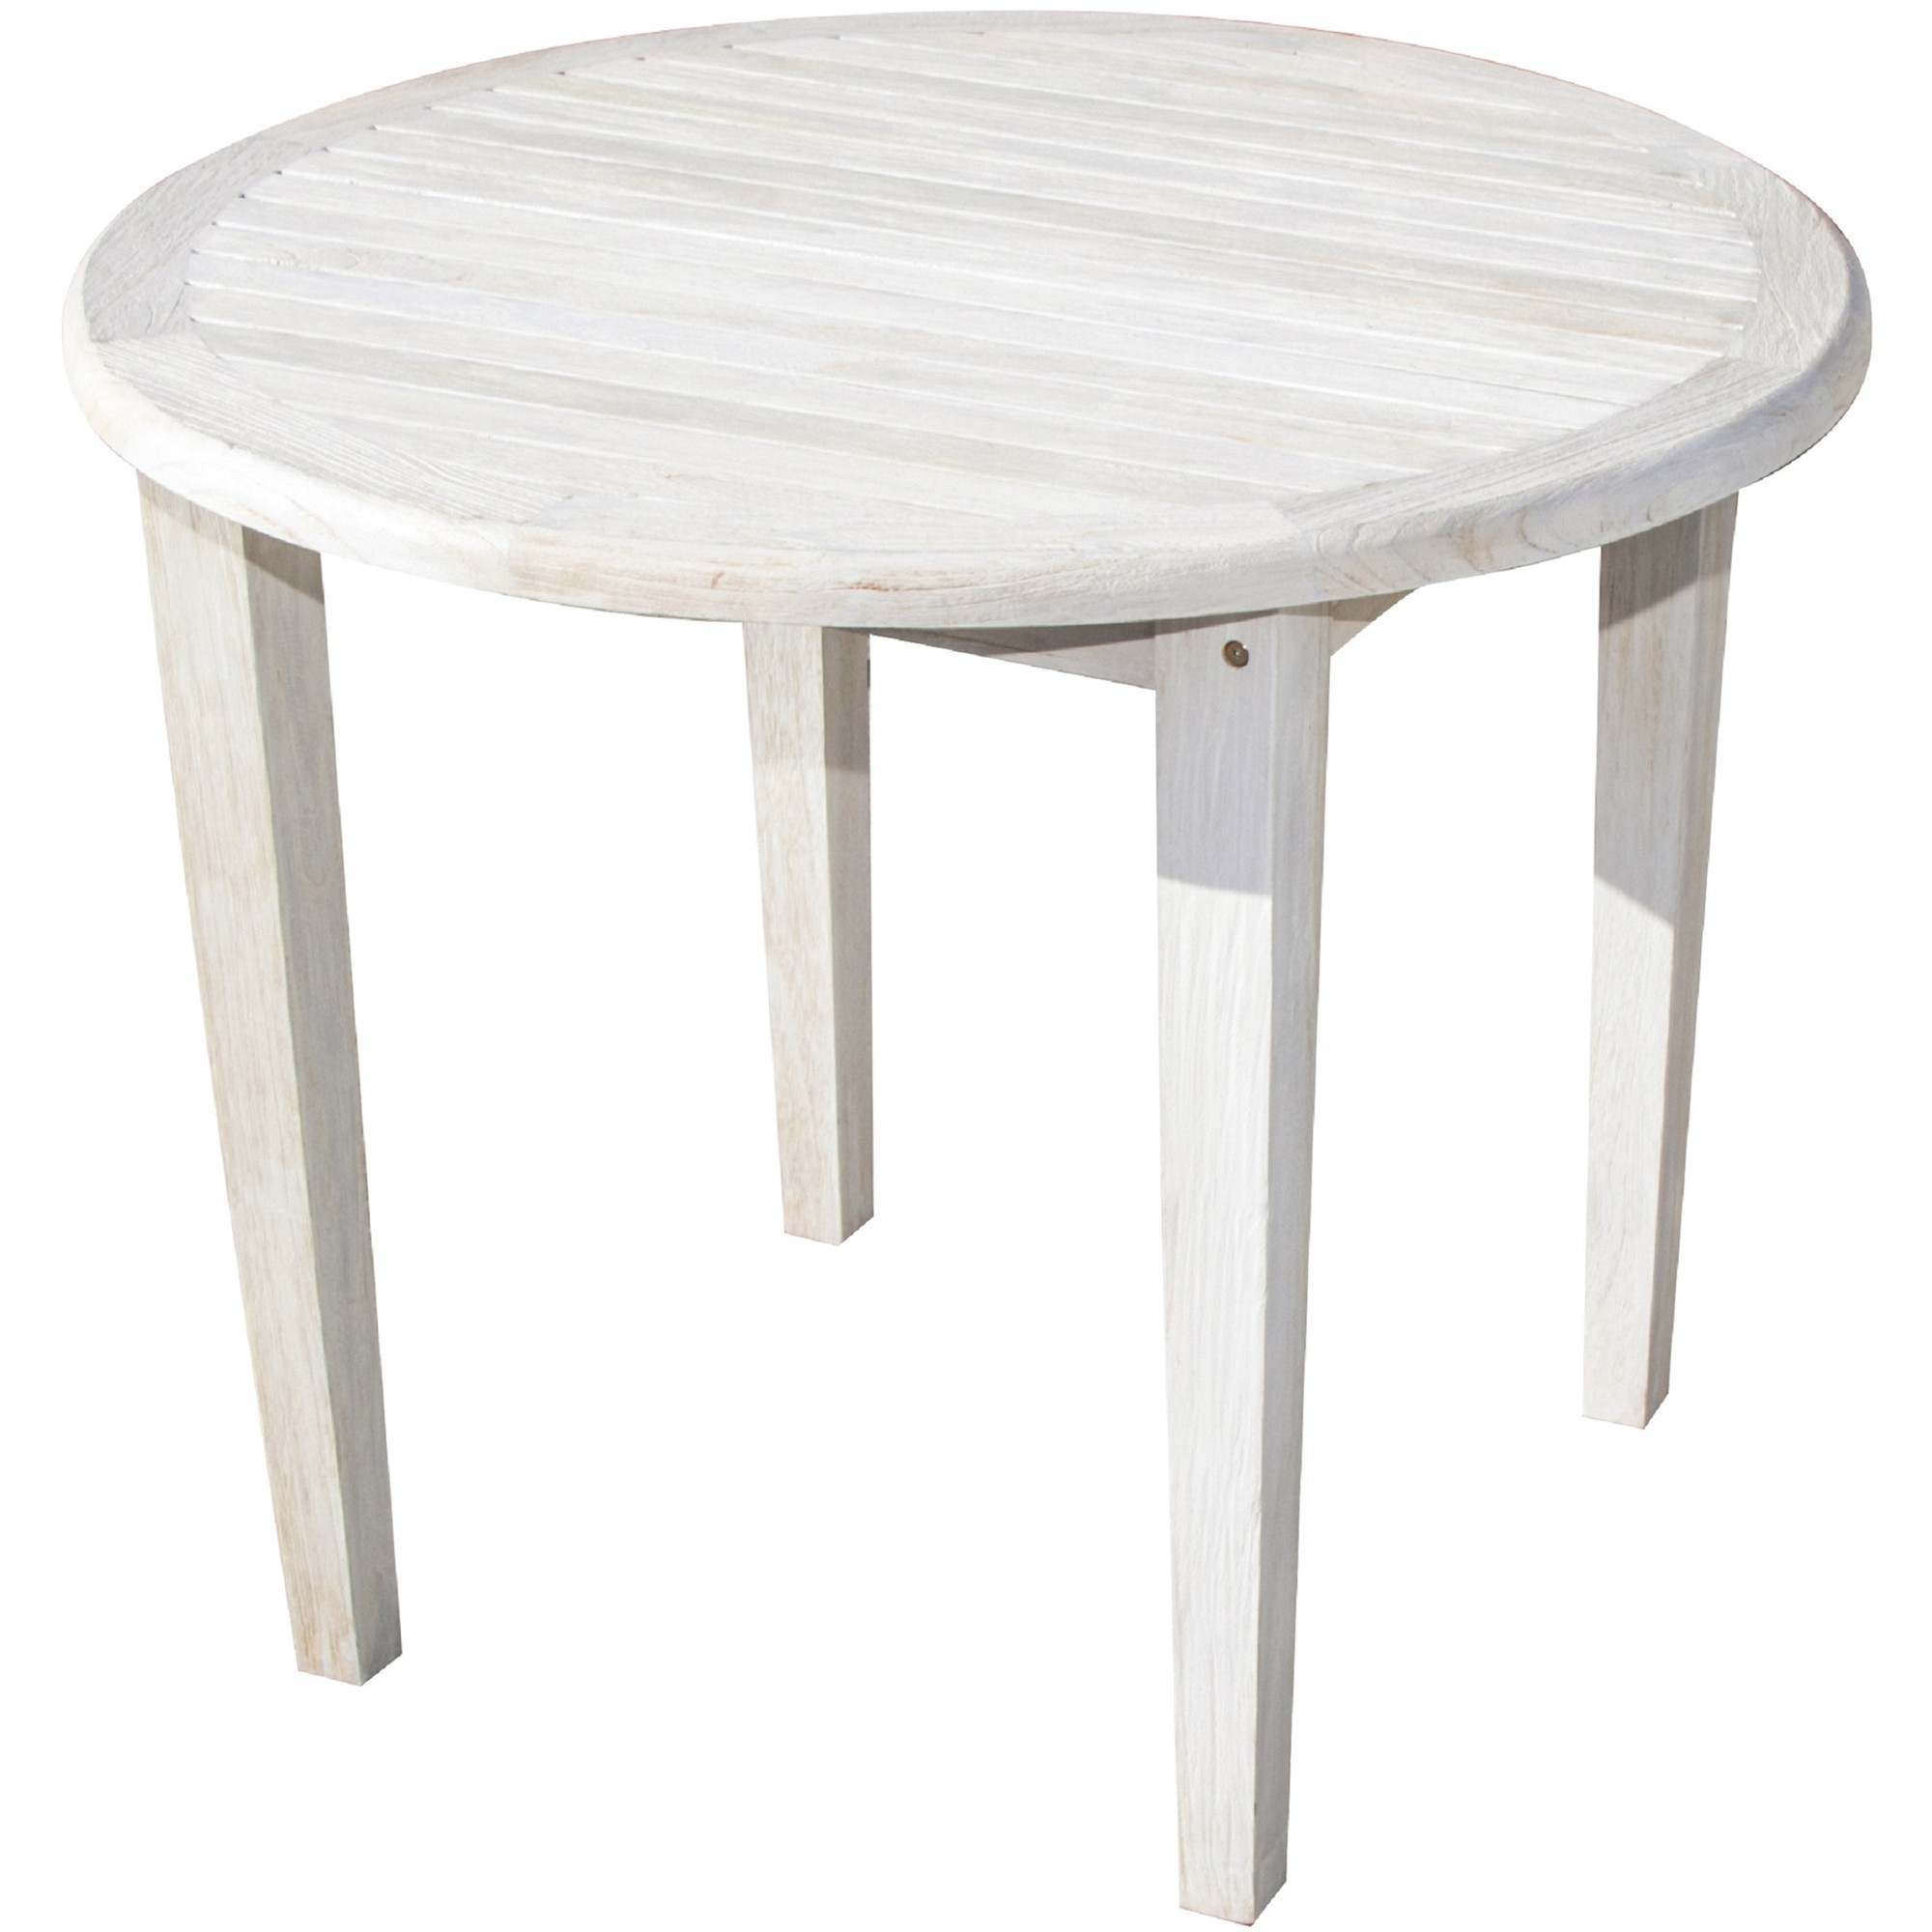 37" Round Compact Teak Dining Table in Driftwood Finish